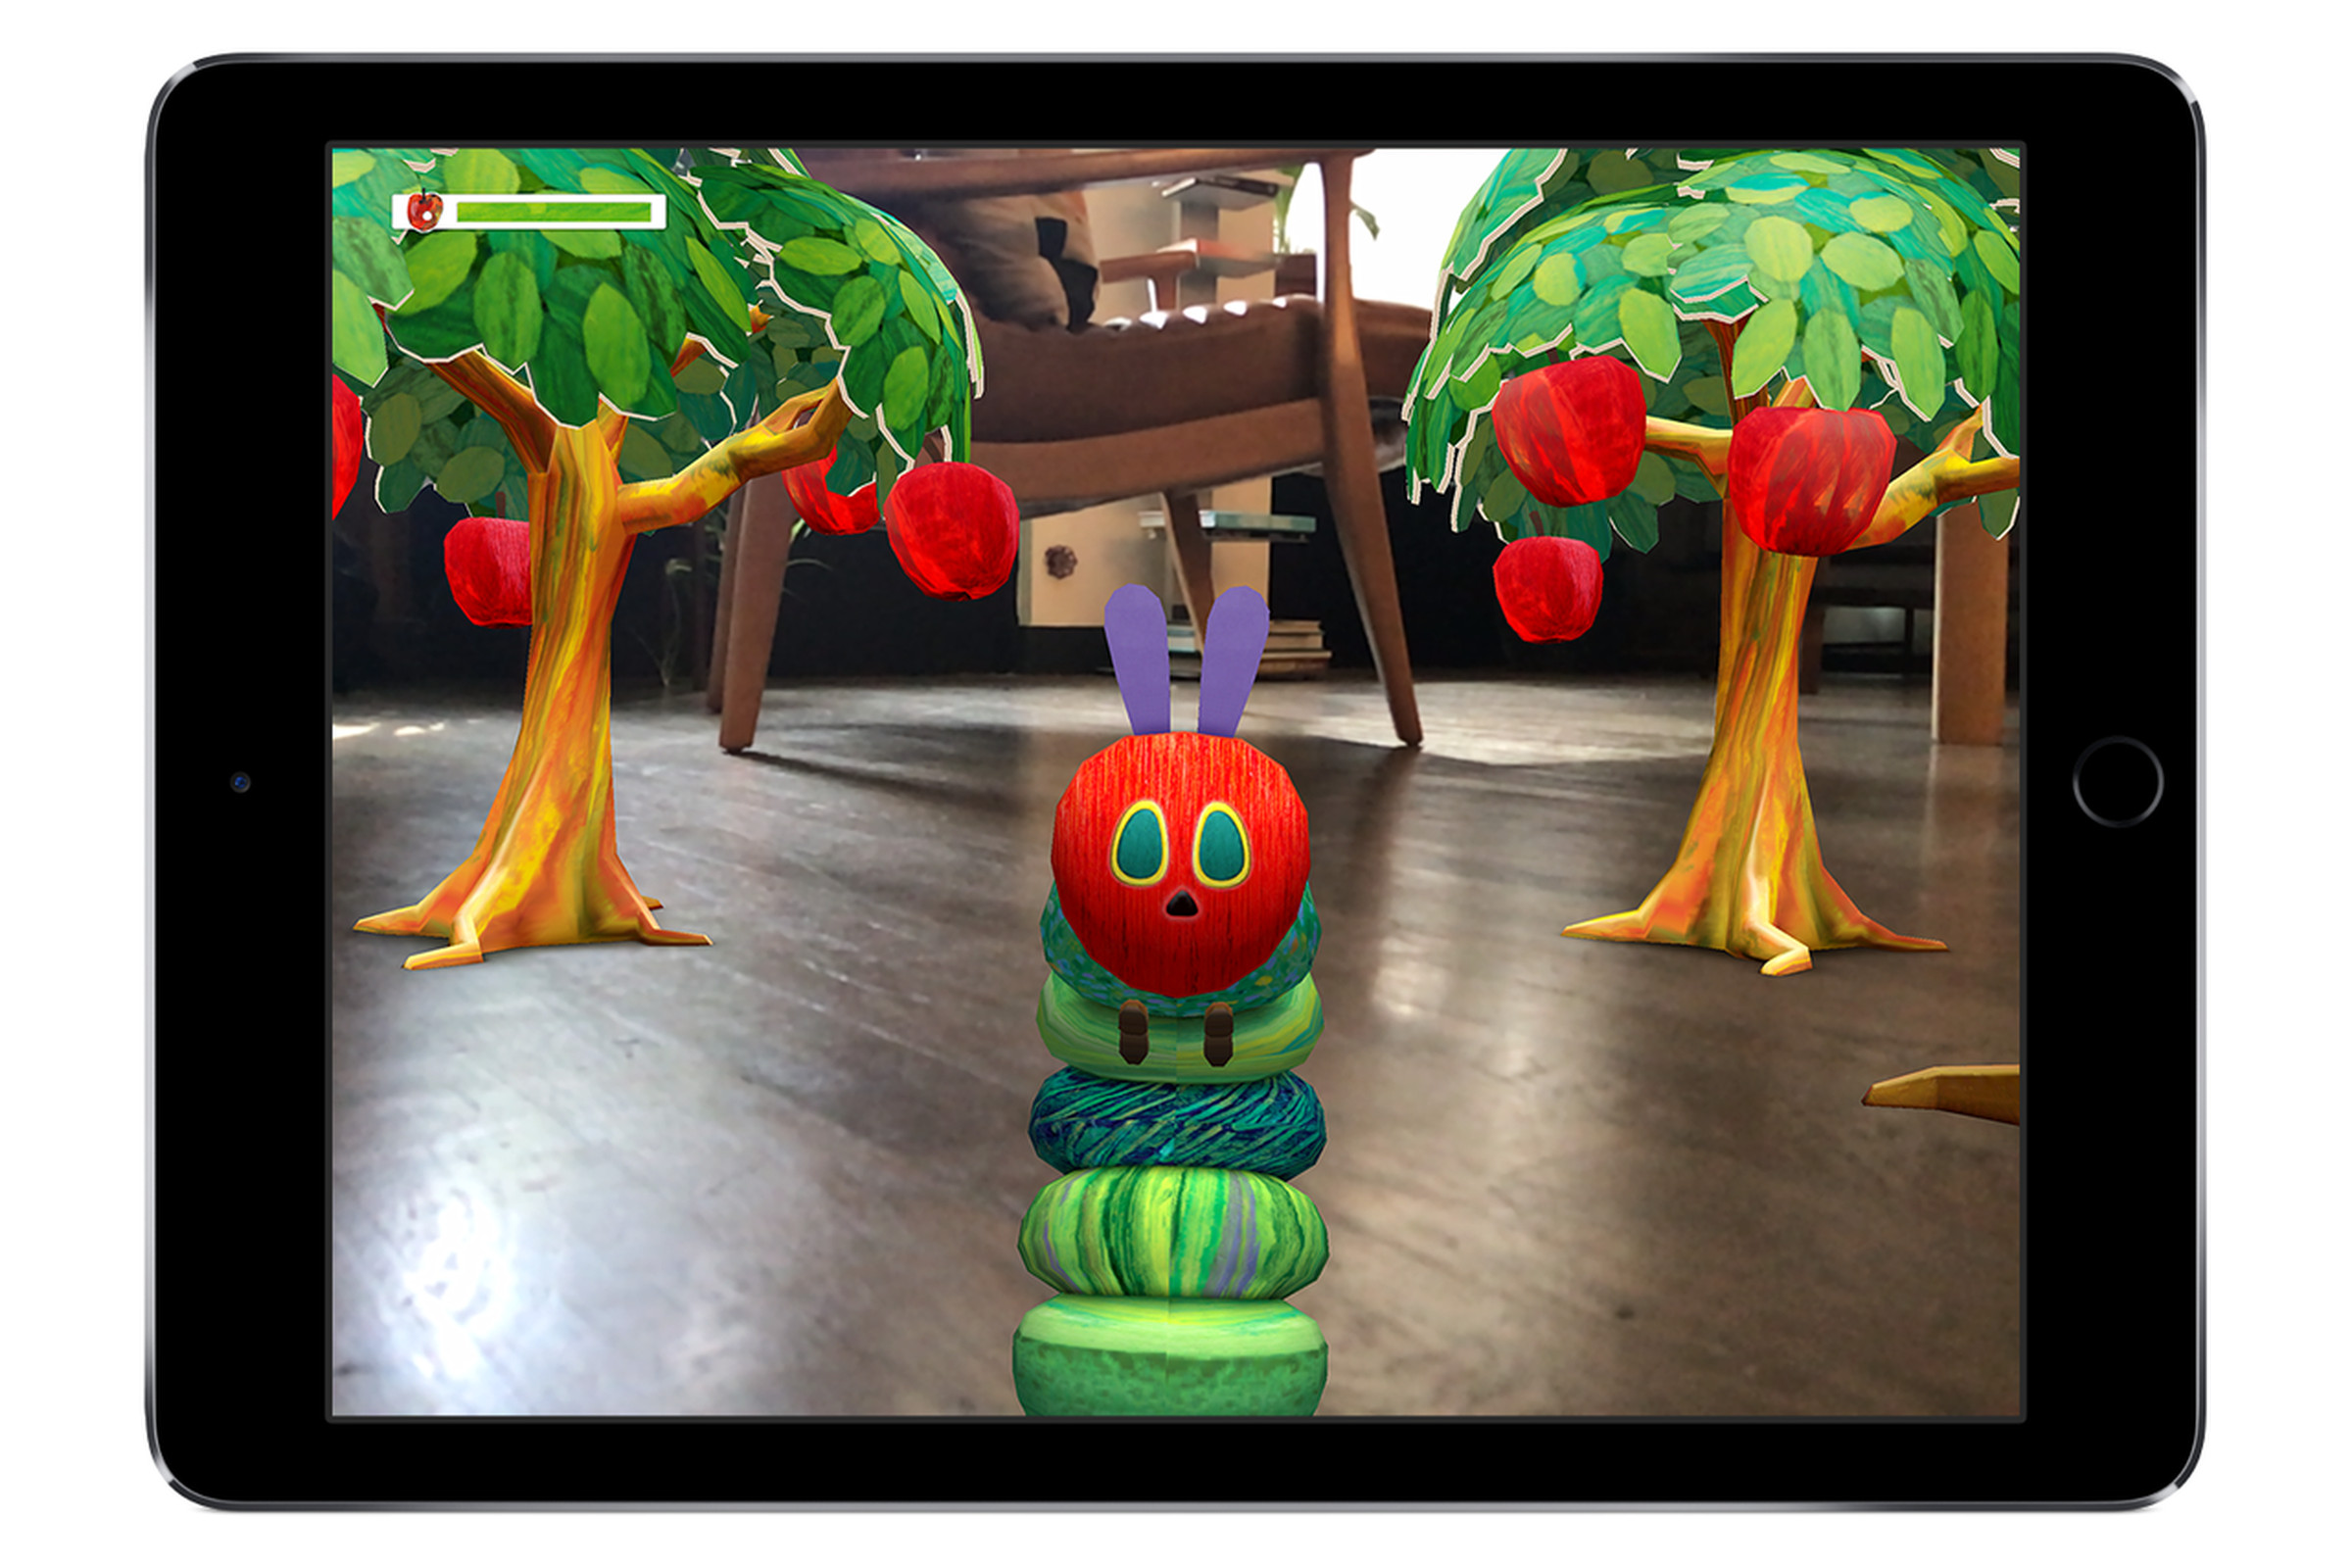 The Very Hungry Caterpillar in AR, by Touch Press